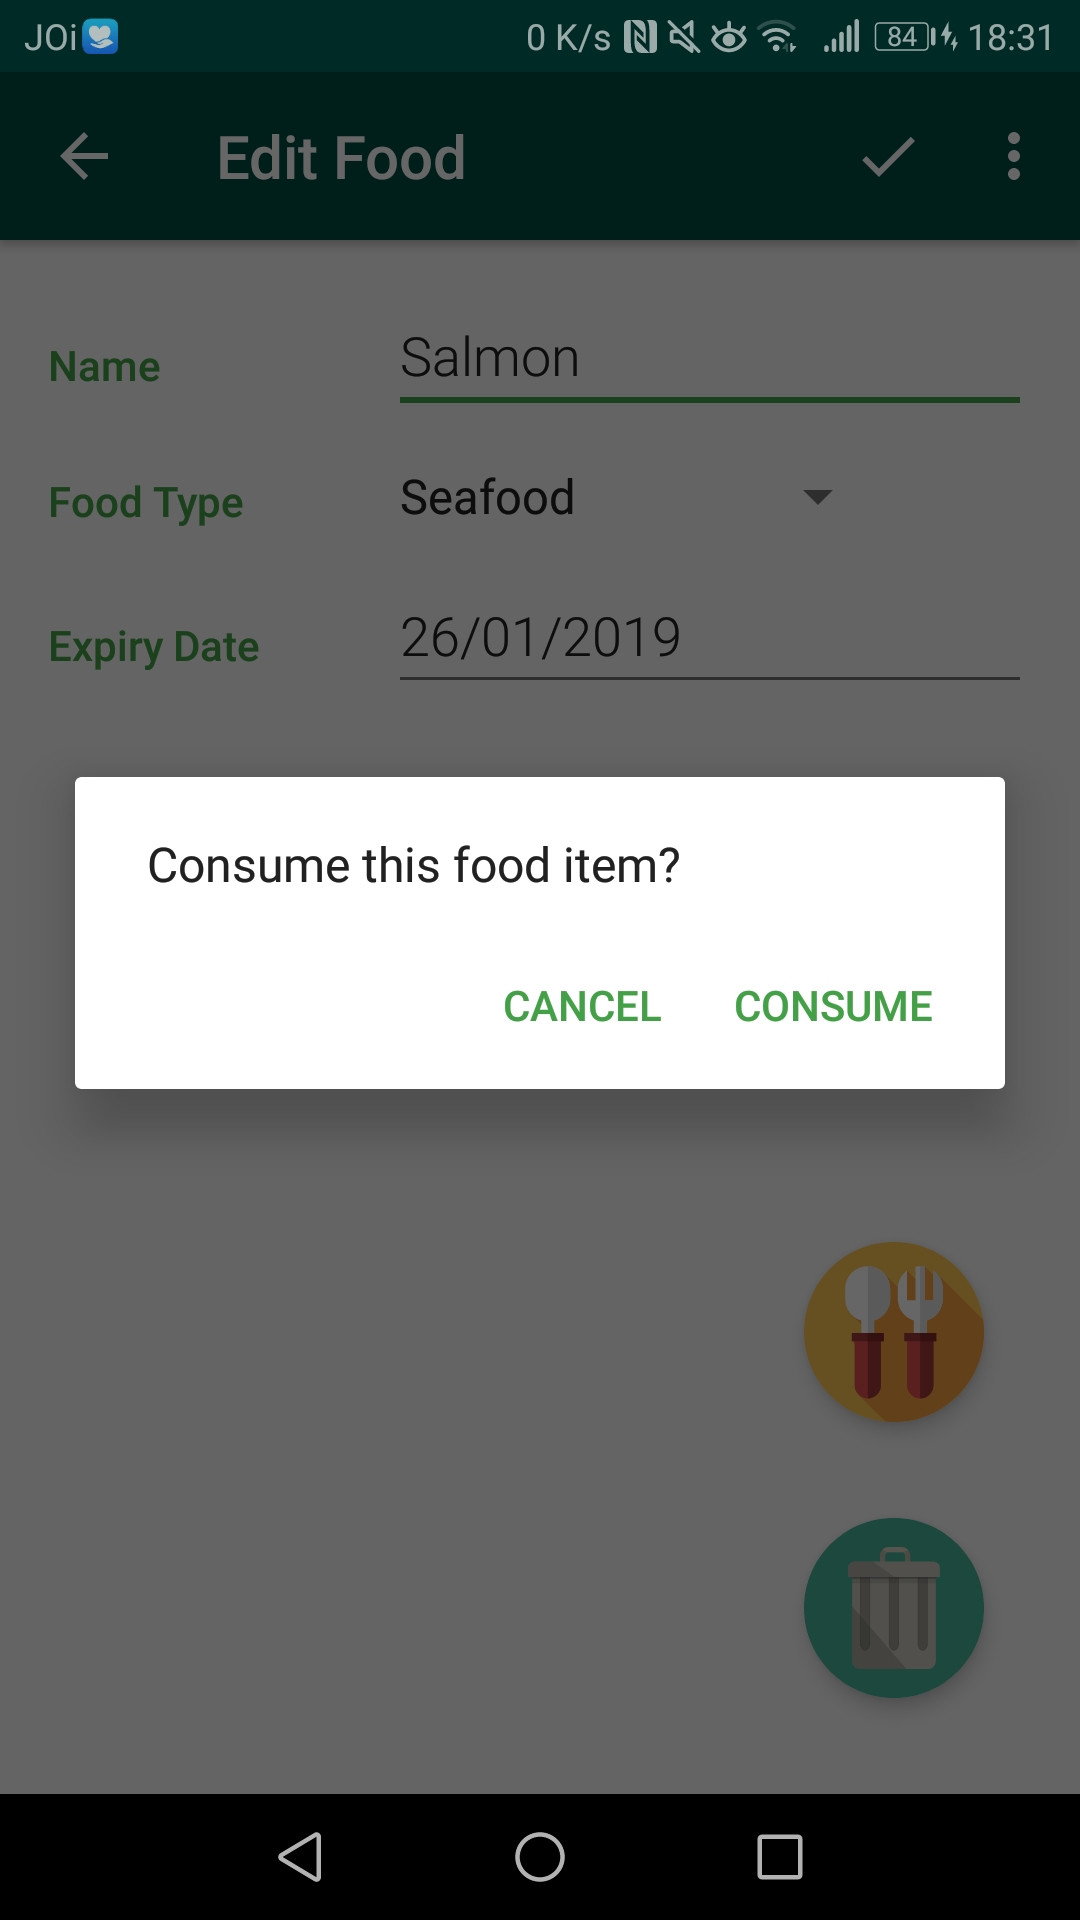 Consume food screen features a 
                            dialog to ensure user confirmation.